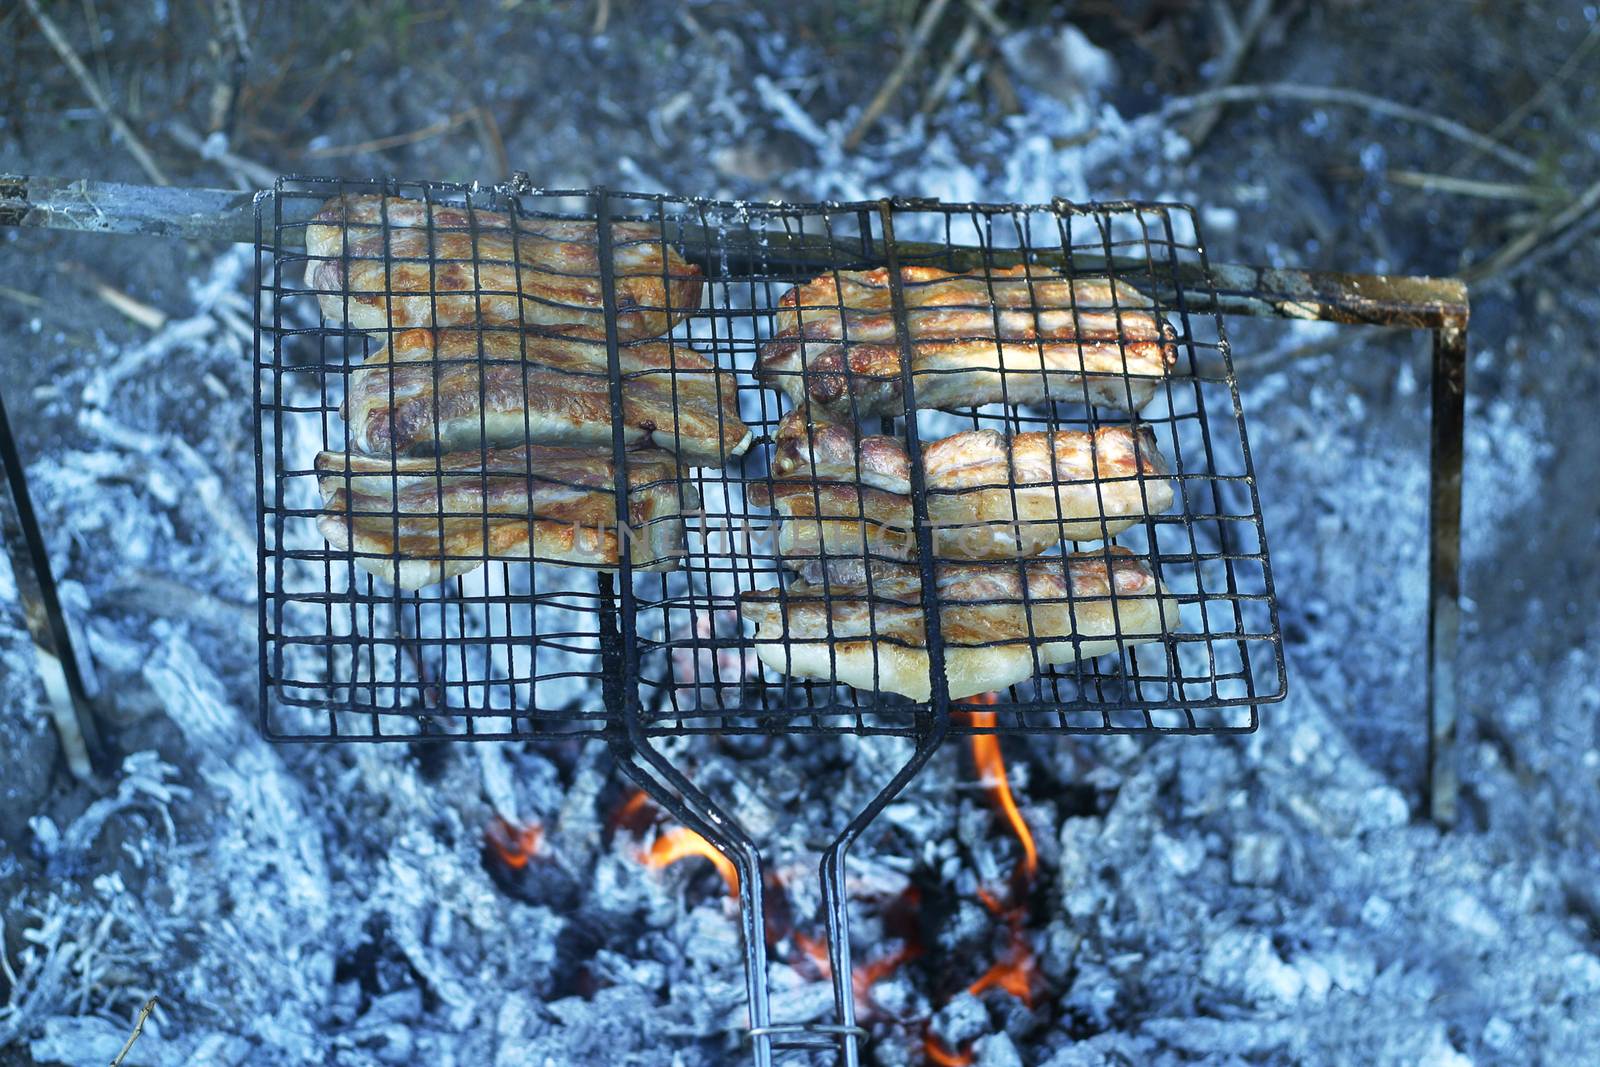 Barbeque from pork prepared outdoors on a hot summer day in a camp